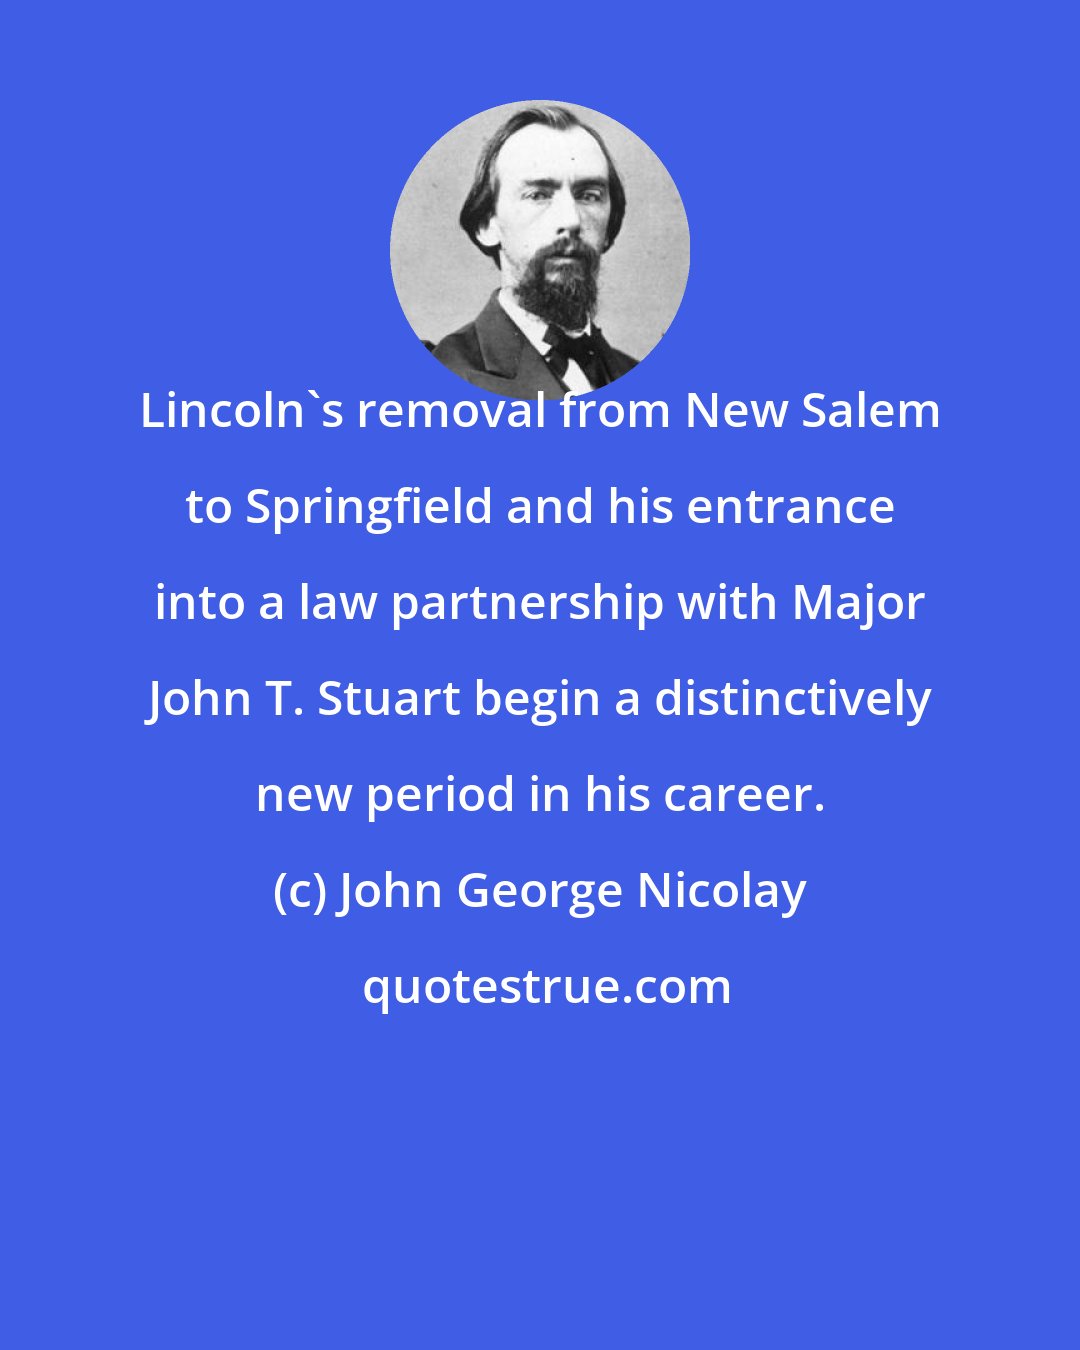 John George Nicolay: Lincoln's removal from New Salem to Springfield and his entrance into a law partnership with Major John T. Stuart begin a distinctively new period in his career.